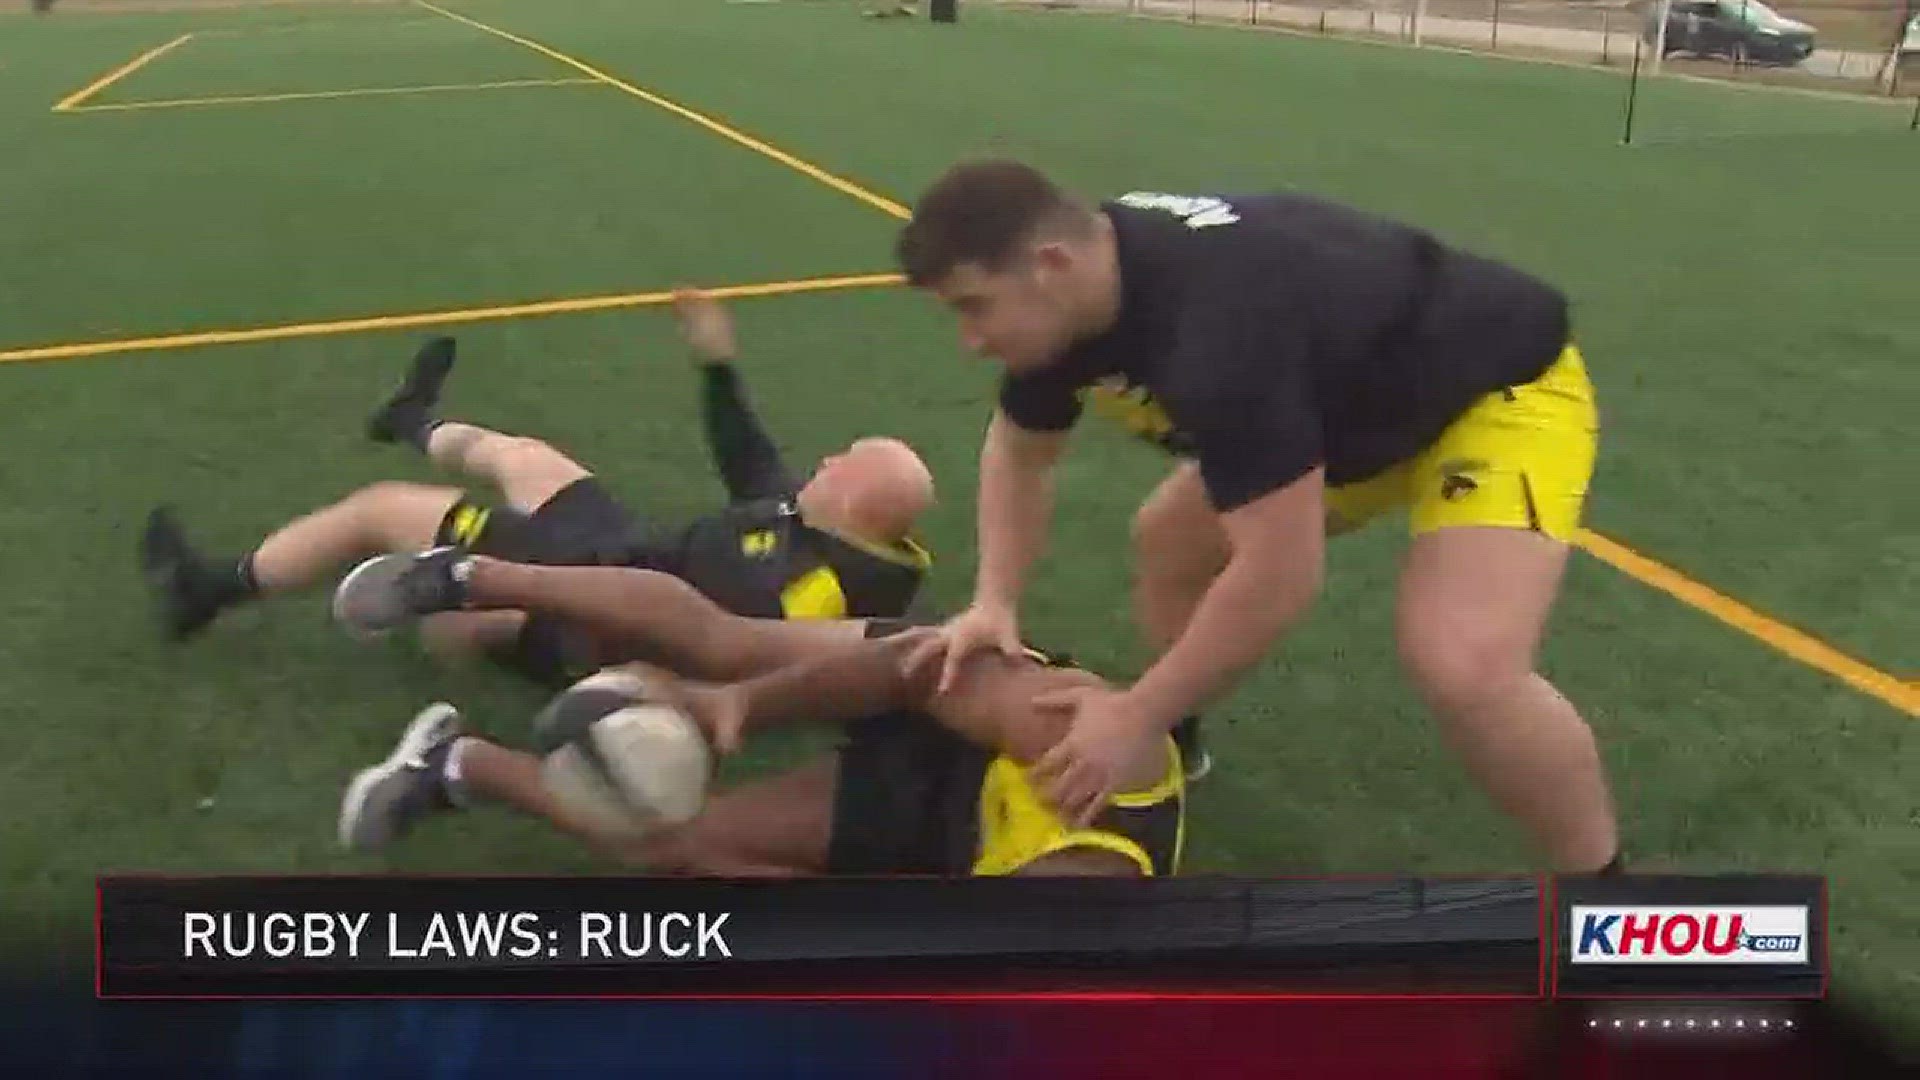 The Houston SaberCats demonstrate this week?s ruby law and explain to KHOU 11 sports reporter Jason Bristol what a ruck is.